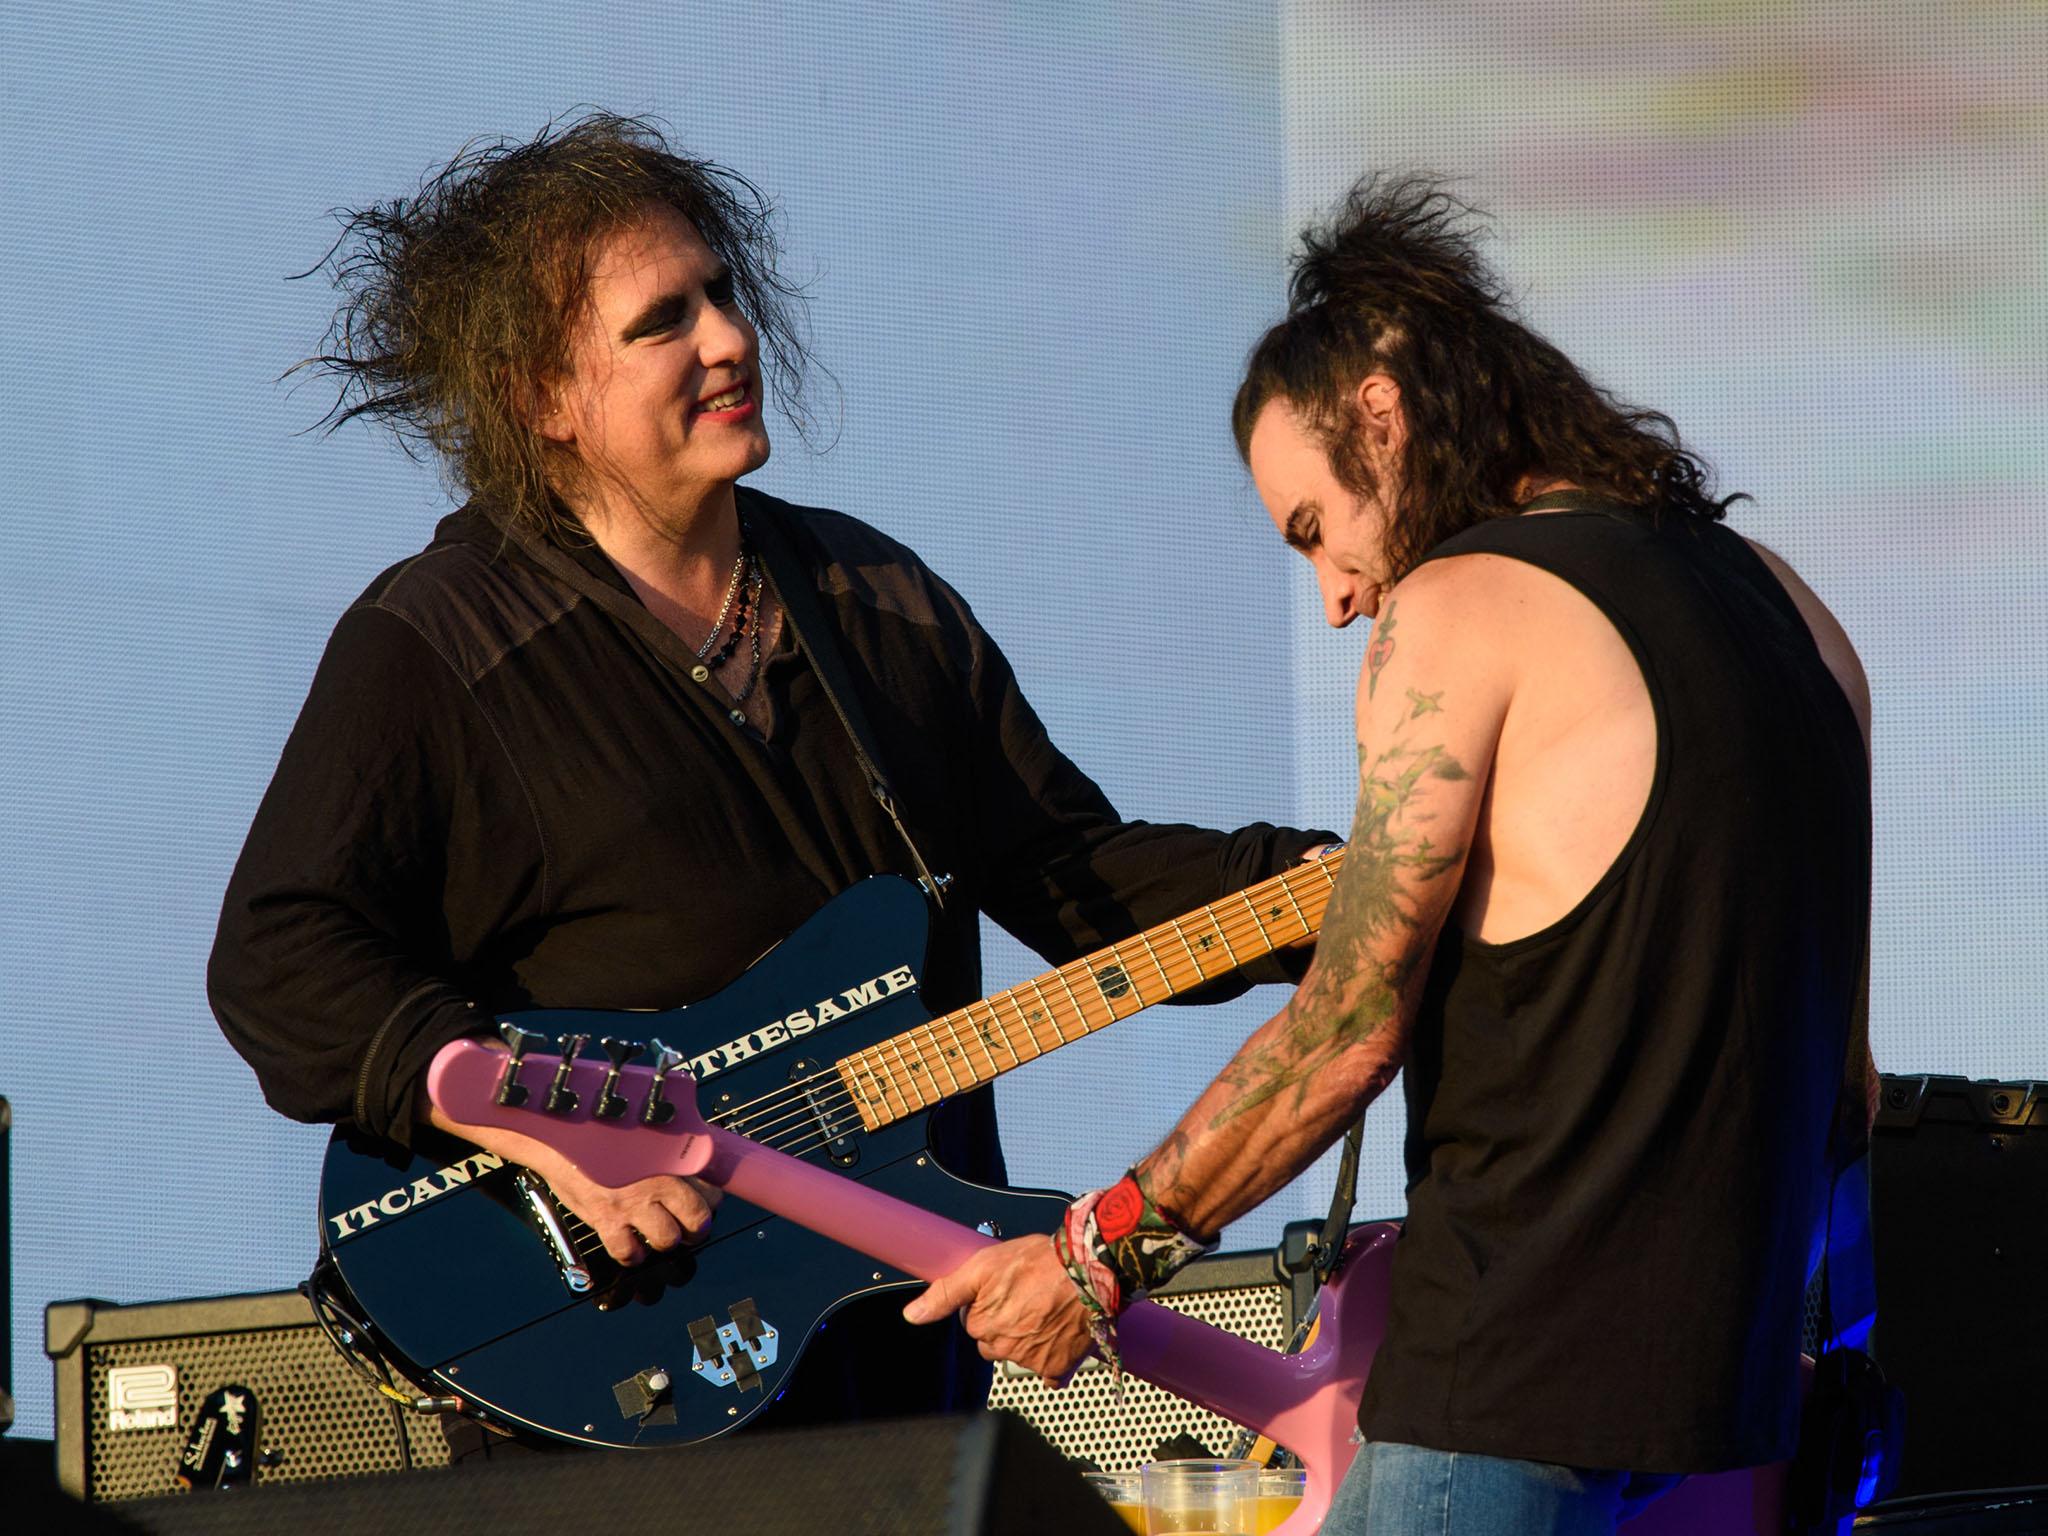 https://static.independent.co.uk/s3fs-public/thumbnails/image/2018/07/08/13/the-cure.jpg